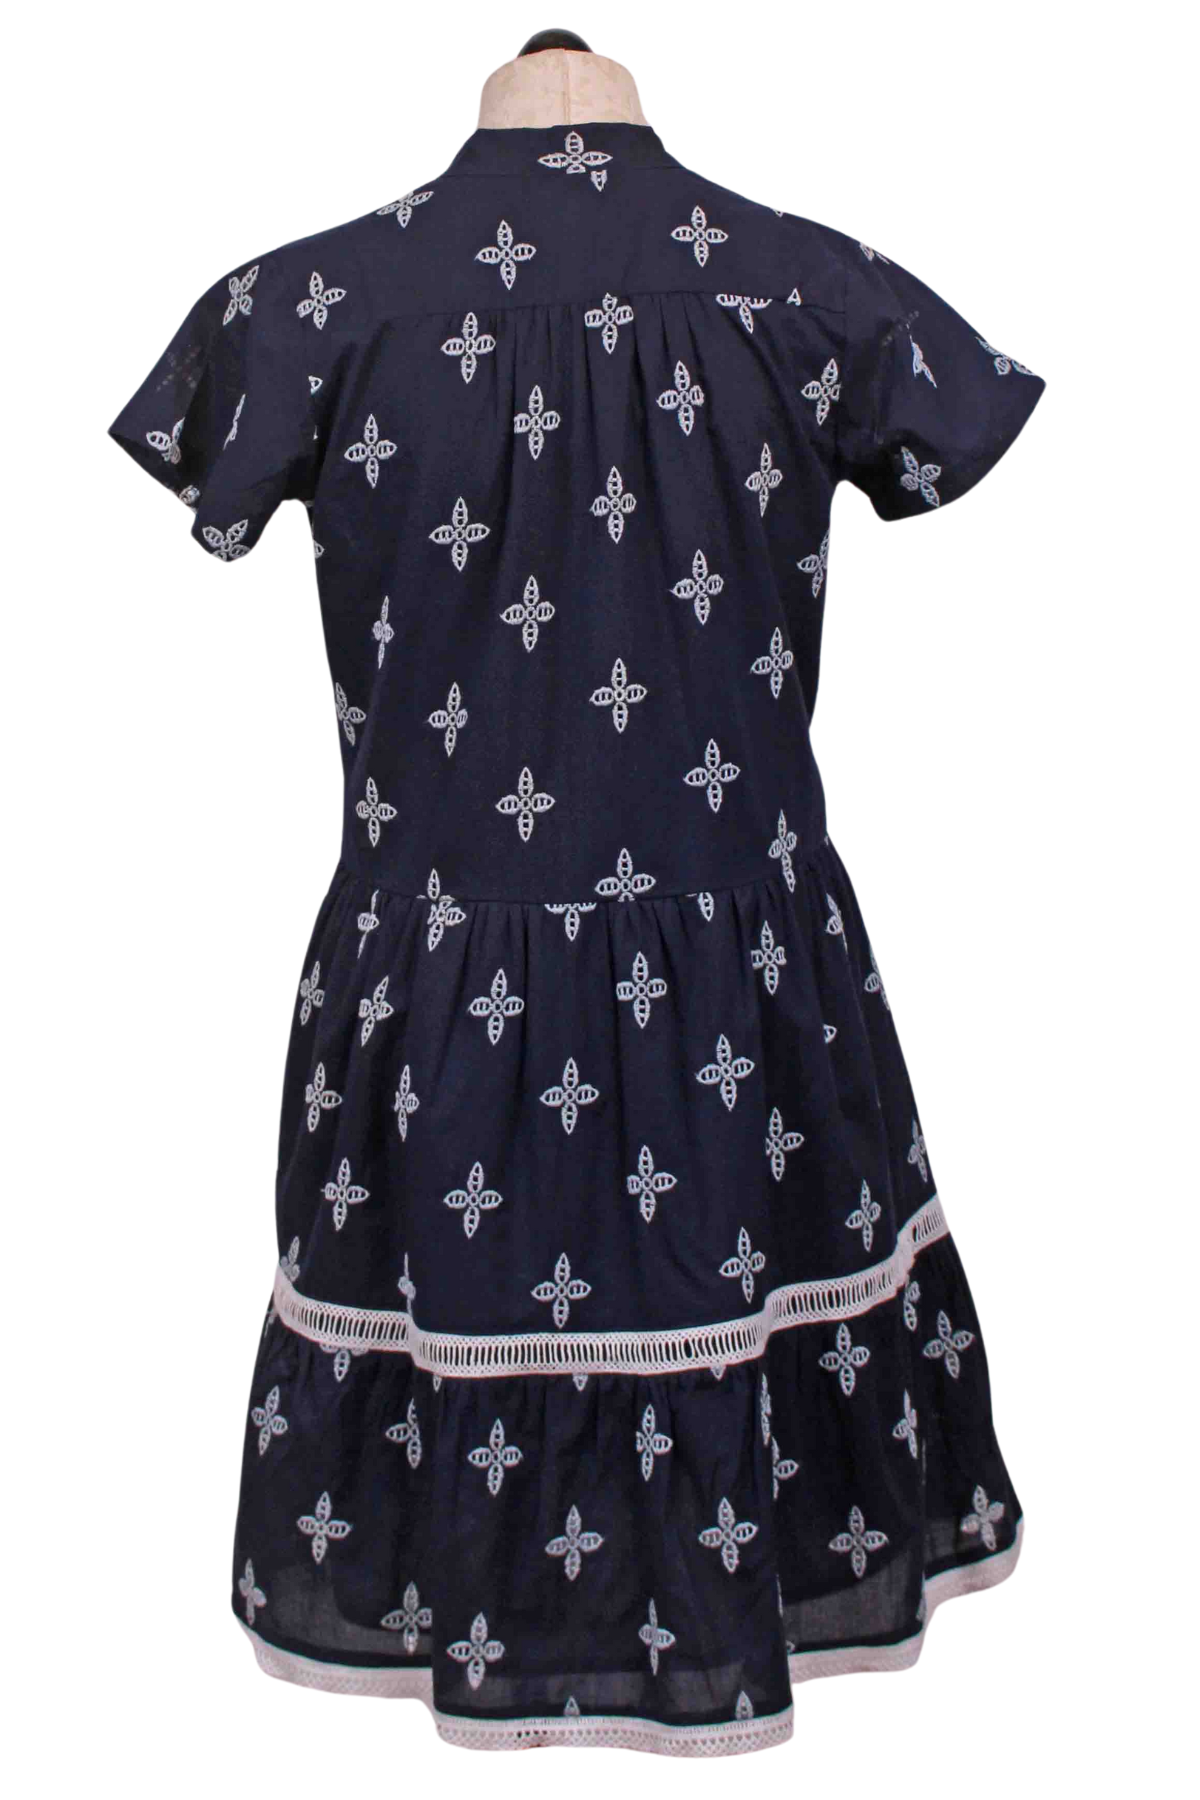 back view of Navy Blue Short Sleeve Eyelet Alison Dress by La Plage